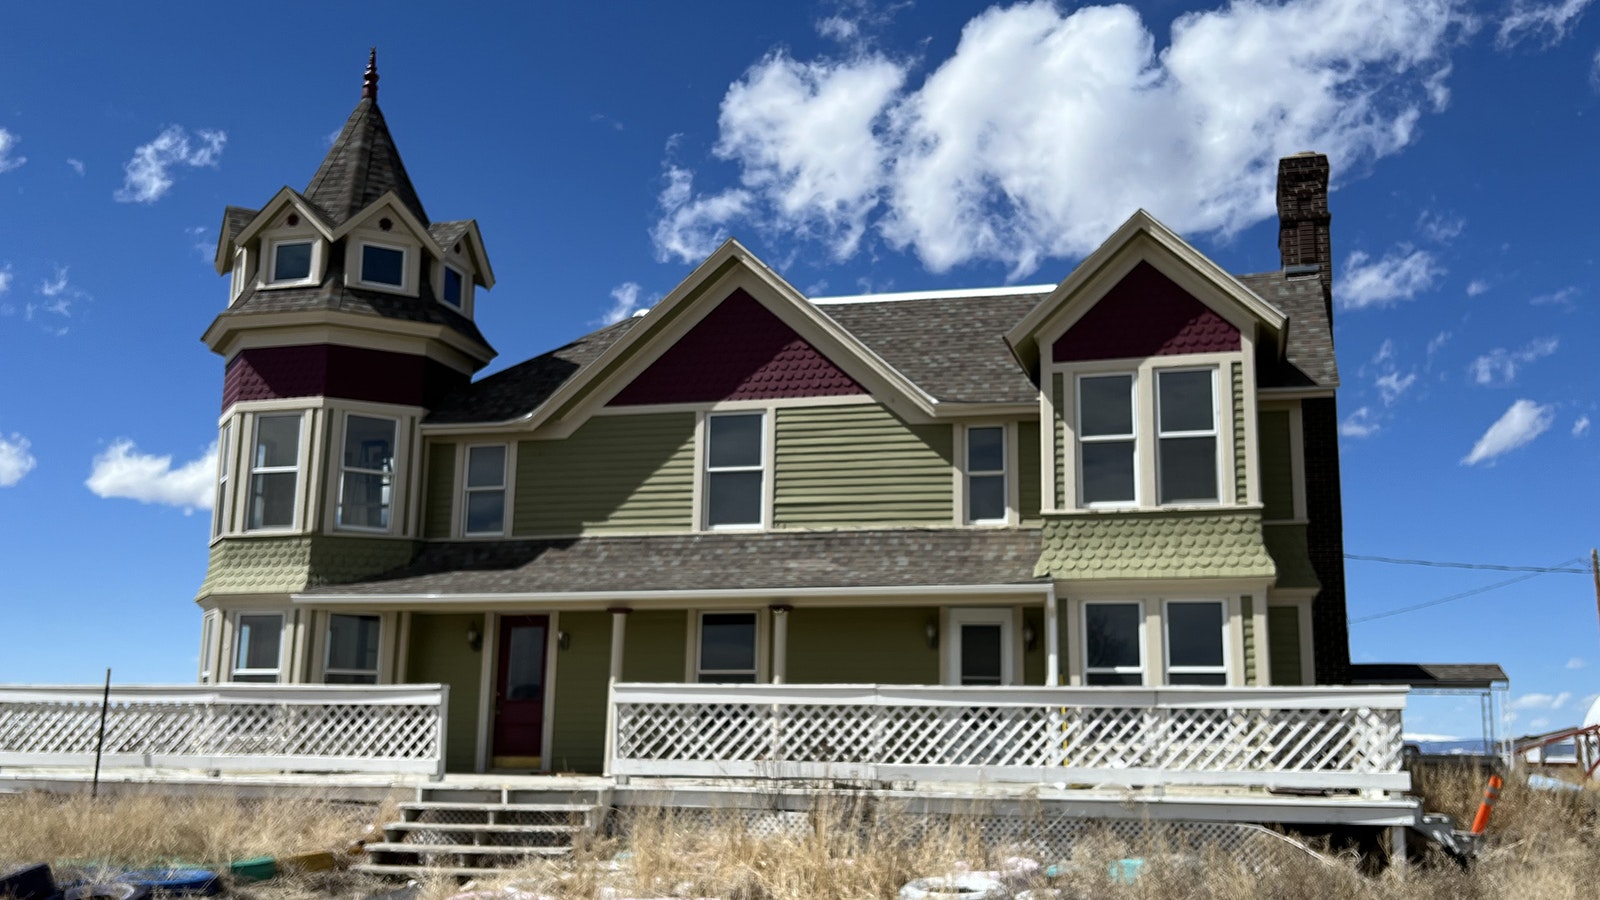 The Holliday House mansion, just west of Laramie, is for sale for $525,000.